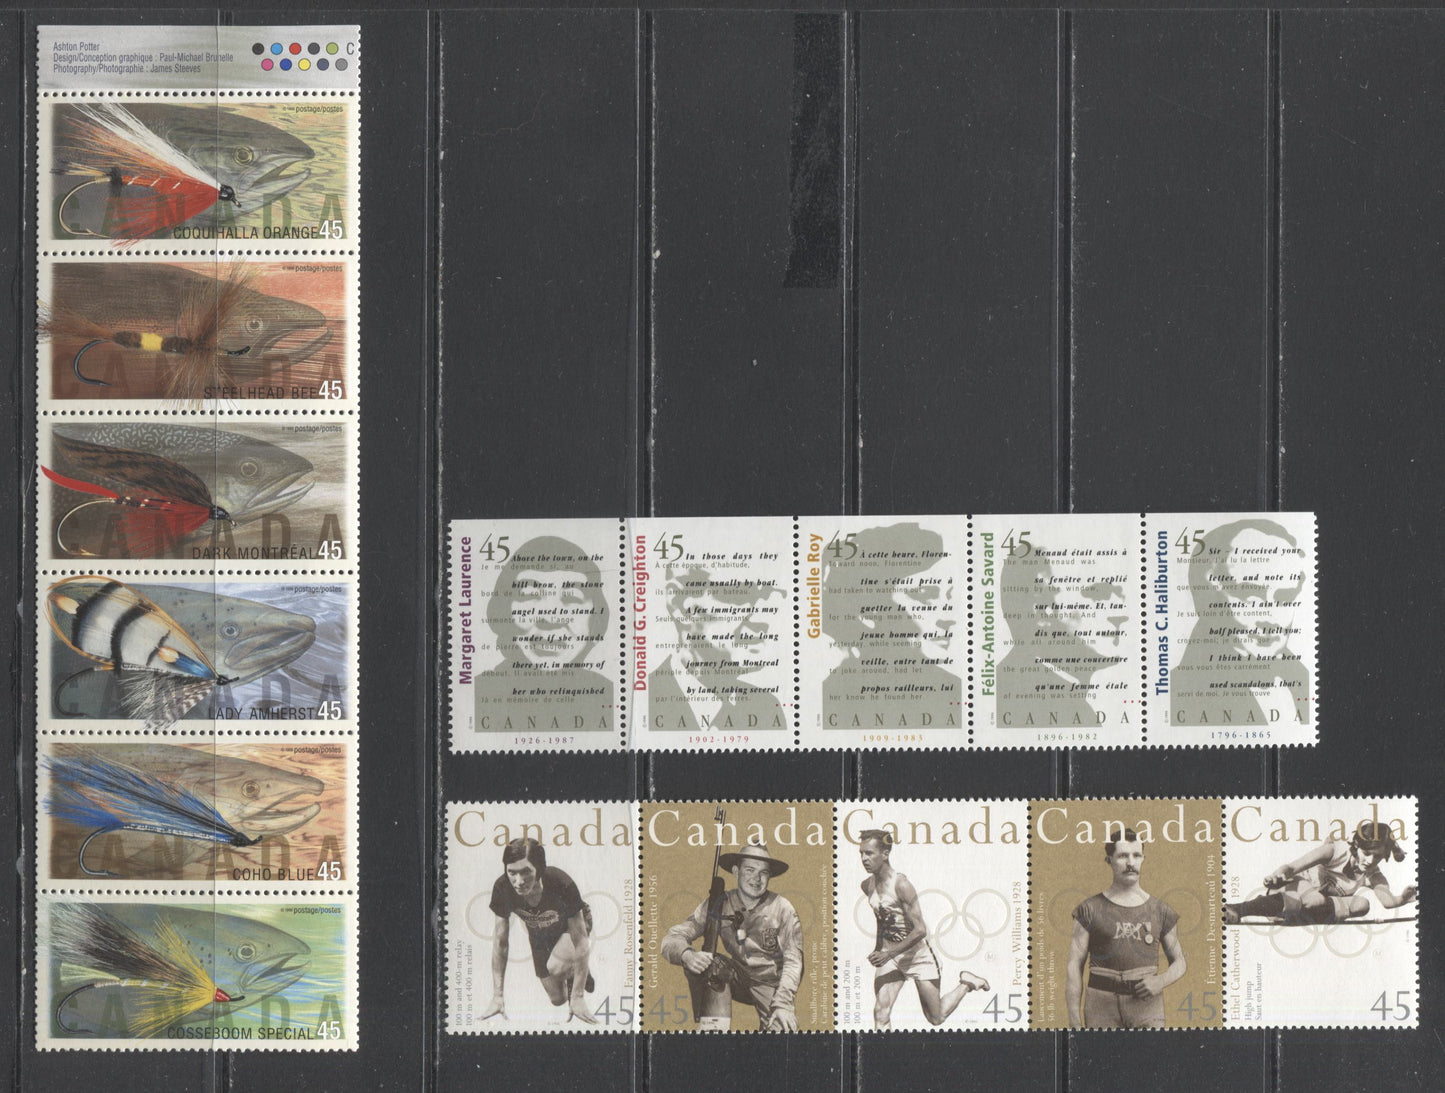 Lot 406 Canada #1612ai, 1626ai, 1720aii 45c Multicolored Ethel Catherwood - Cosseboom Special, 1996-1998 Commemorative, 3 VFNH Strips Of 5 & 6 From The Annual Collection